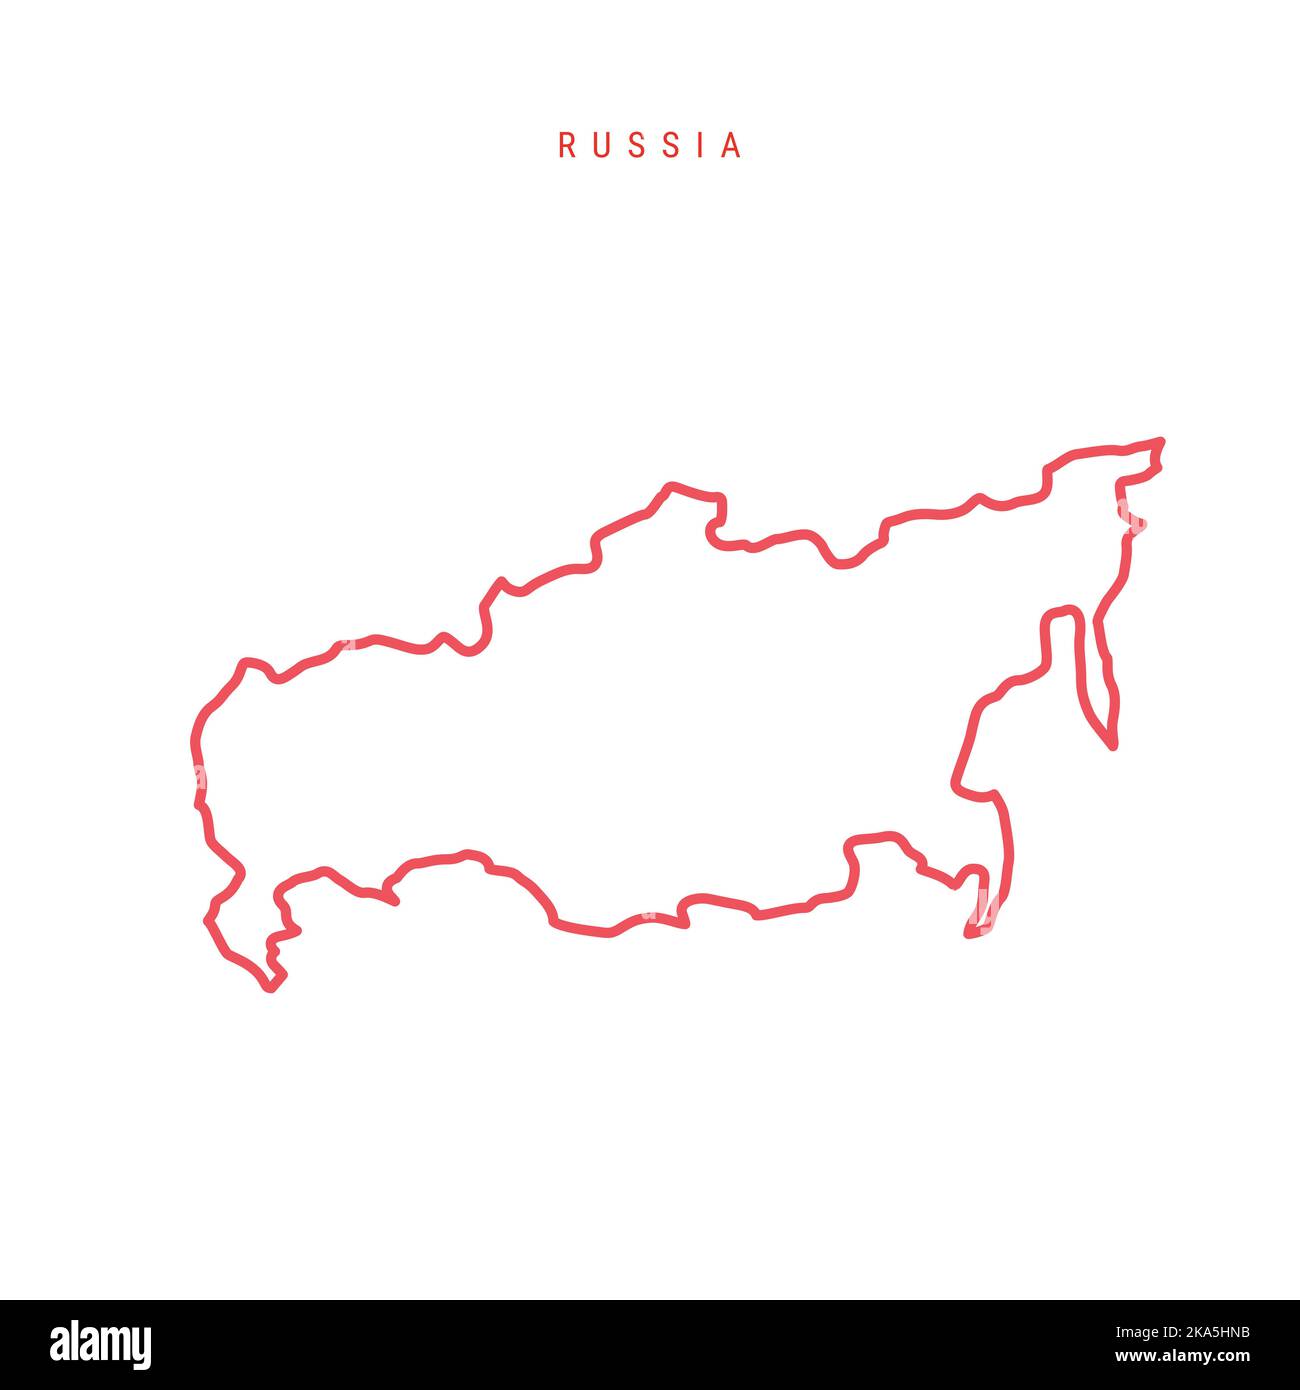 Russia outline map. Russian red border. Country name. illustration. Stock Photo